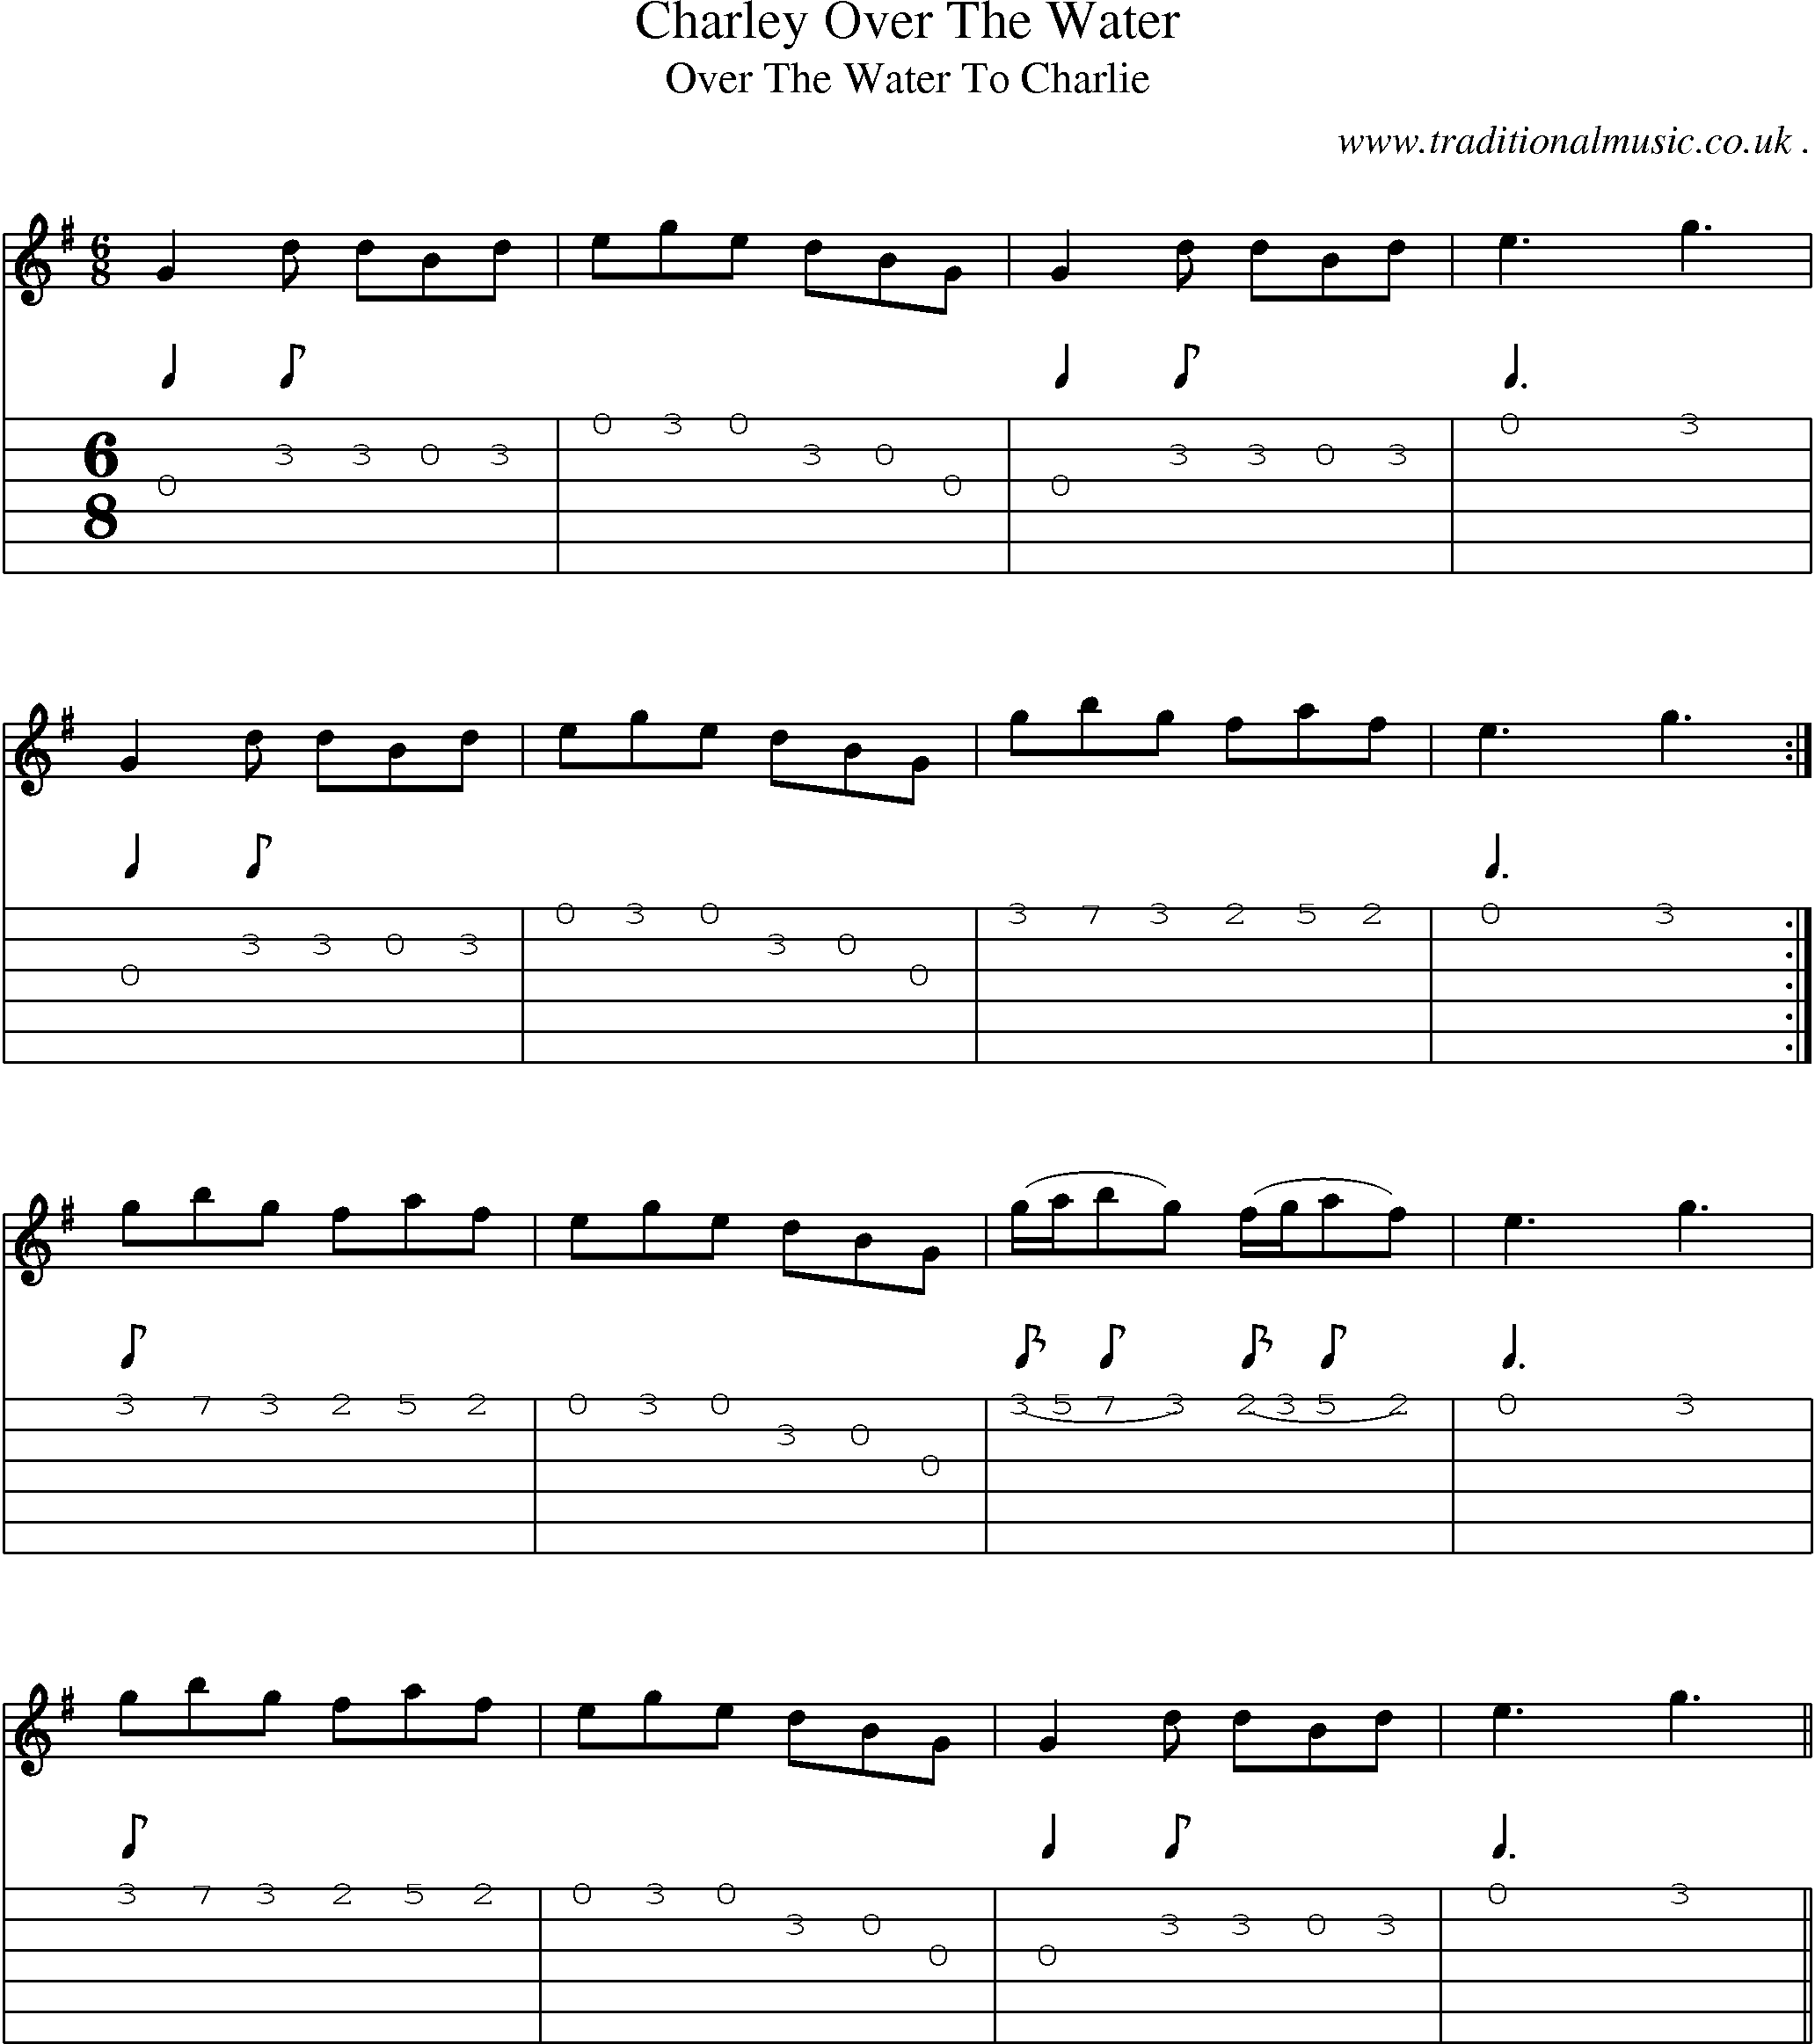 Sheet-Music and Guitar Tabs for Charley Over The Water